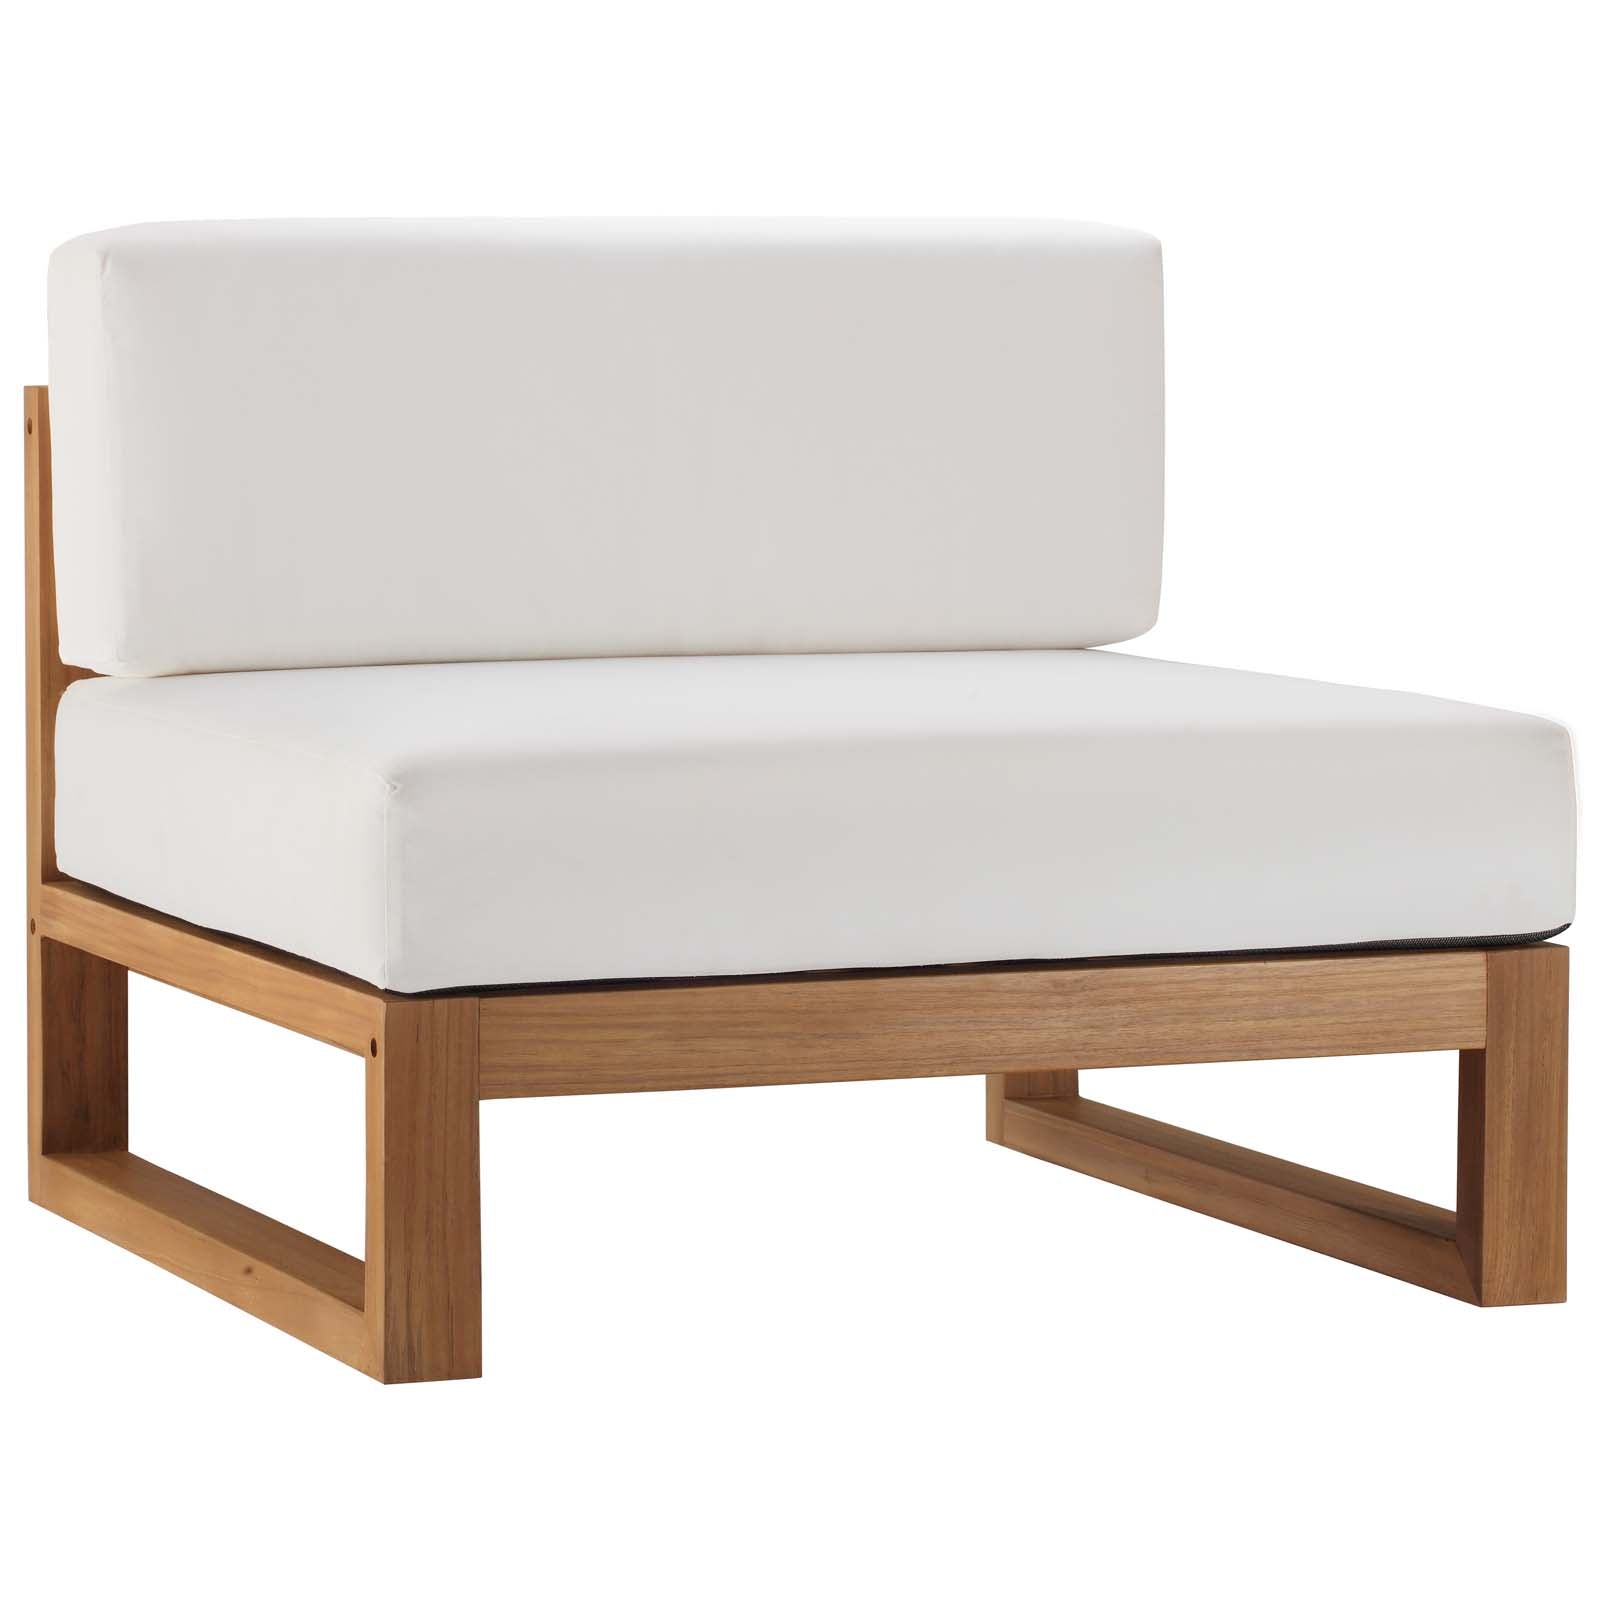 Modway Outdoor Chairs - Upland Outdoor Patio Teak Wood Armless Chair Natural White